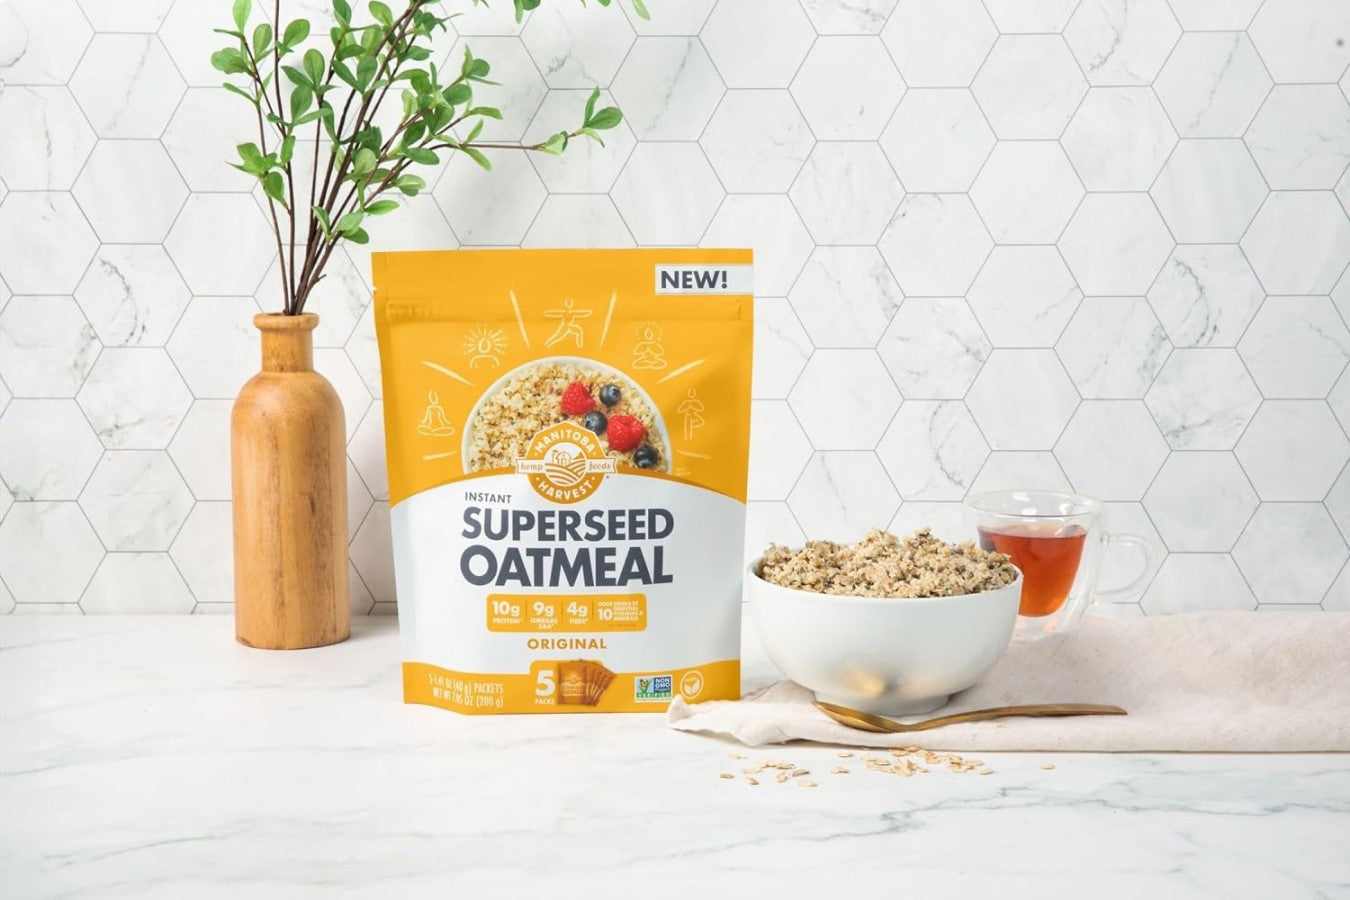 Healthy Breakfast Quick And Easy Instant Oats Manitoba Harvest Original Superseed Oatmeal